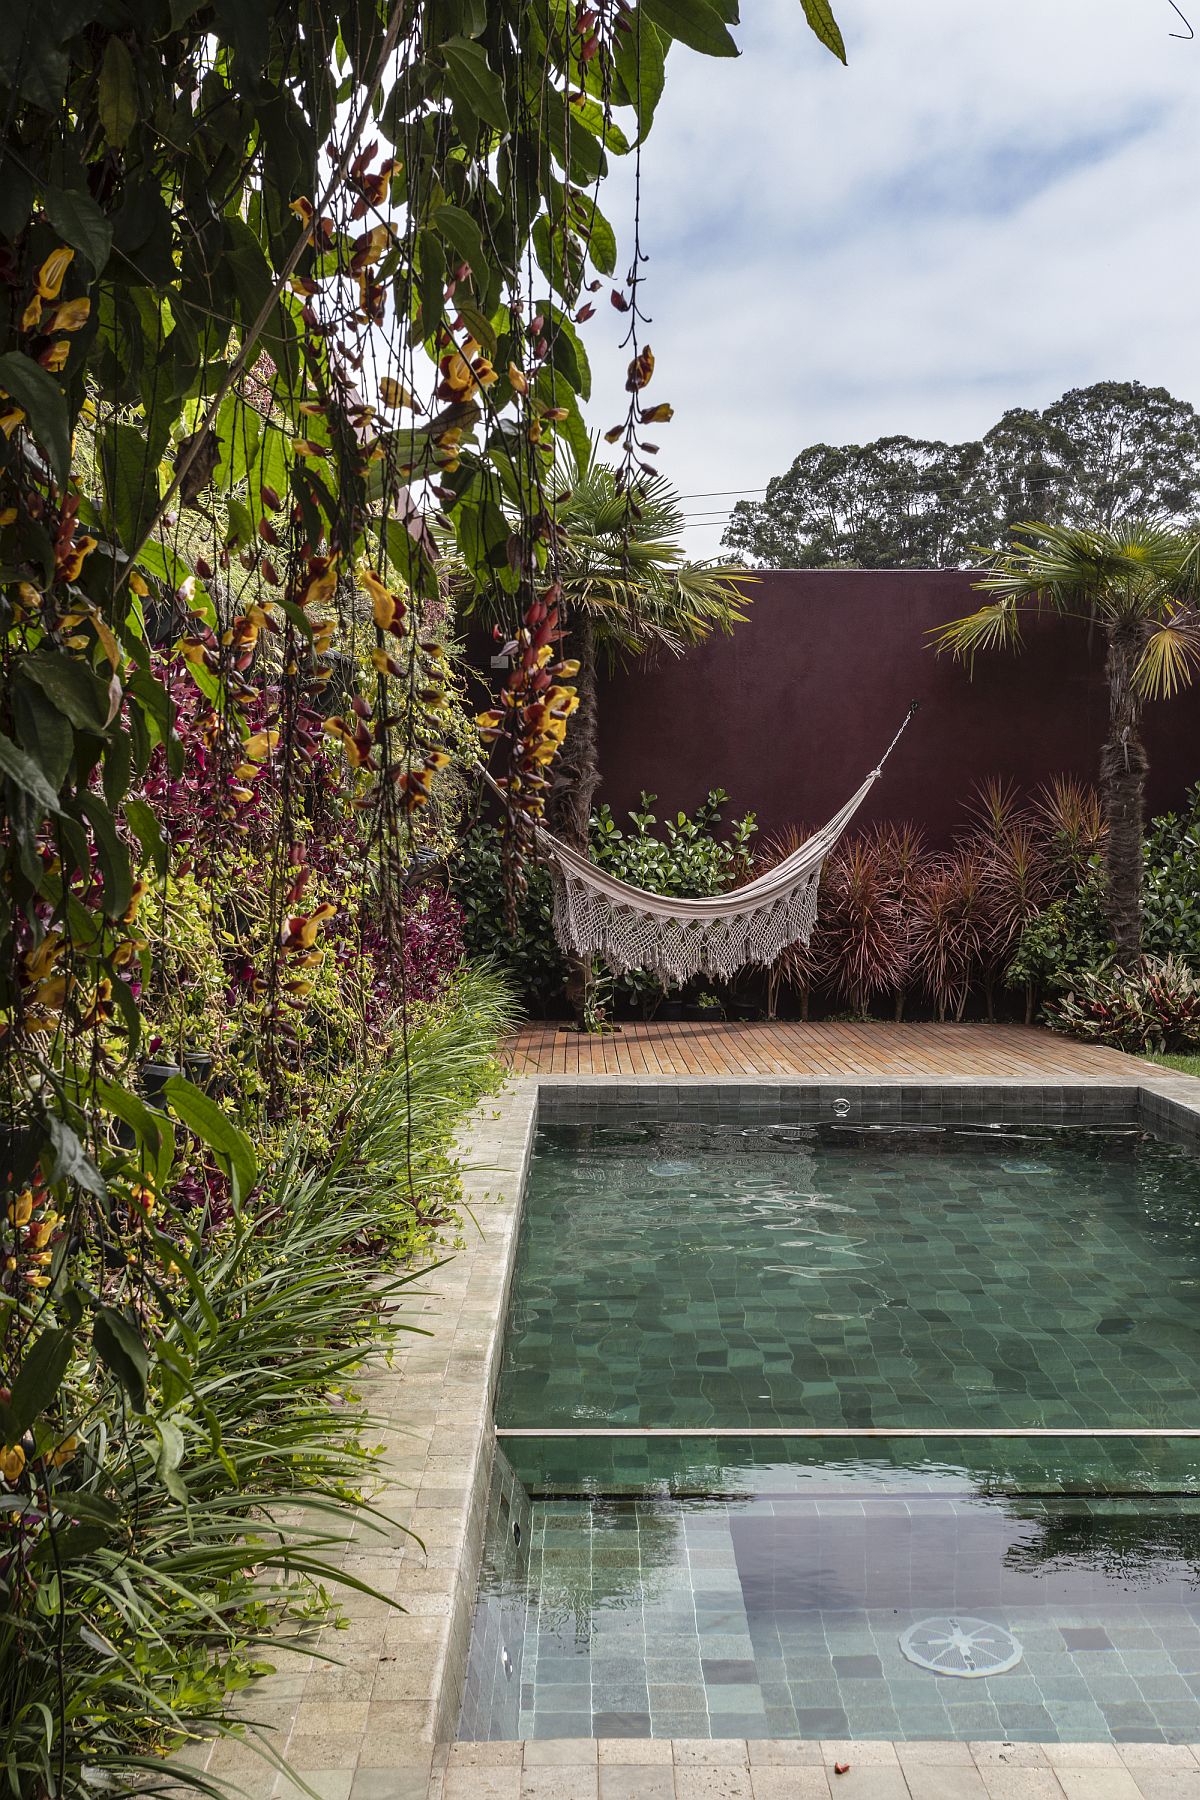 Relaxing hammock in the corner next to the pool offers a serene and private refuge